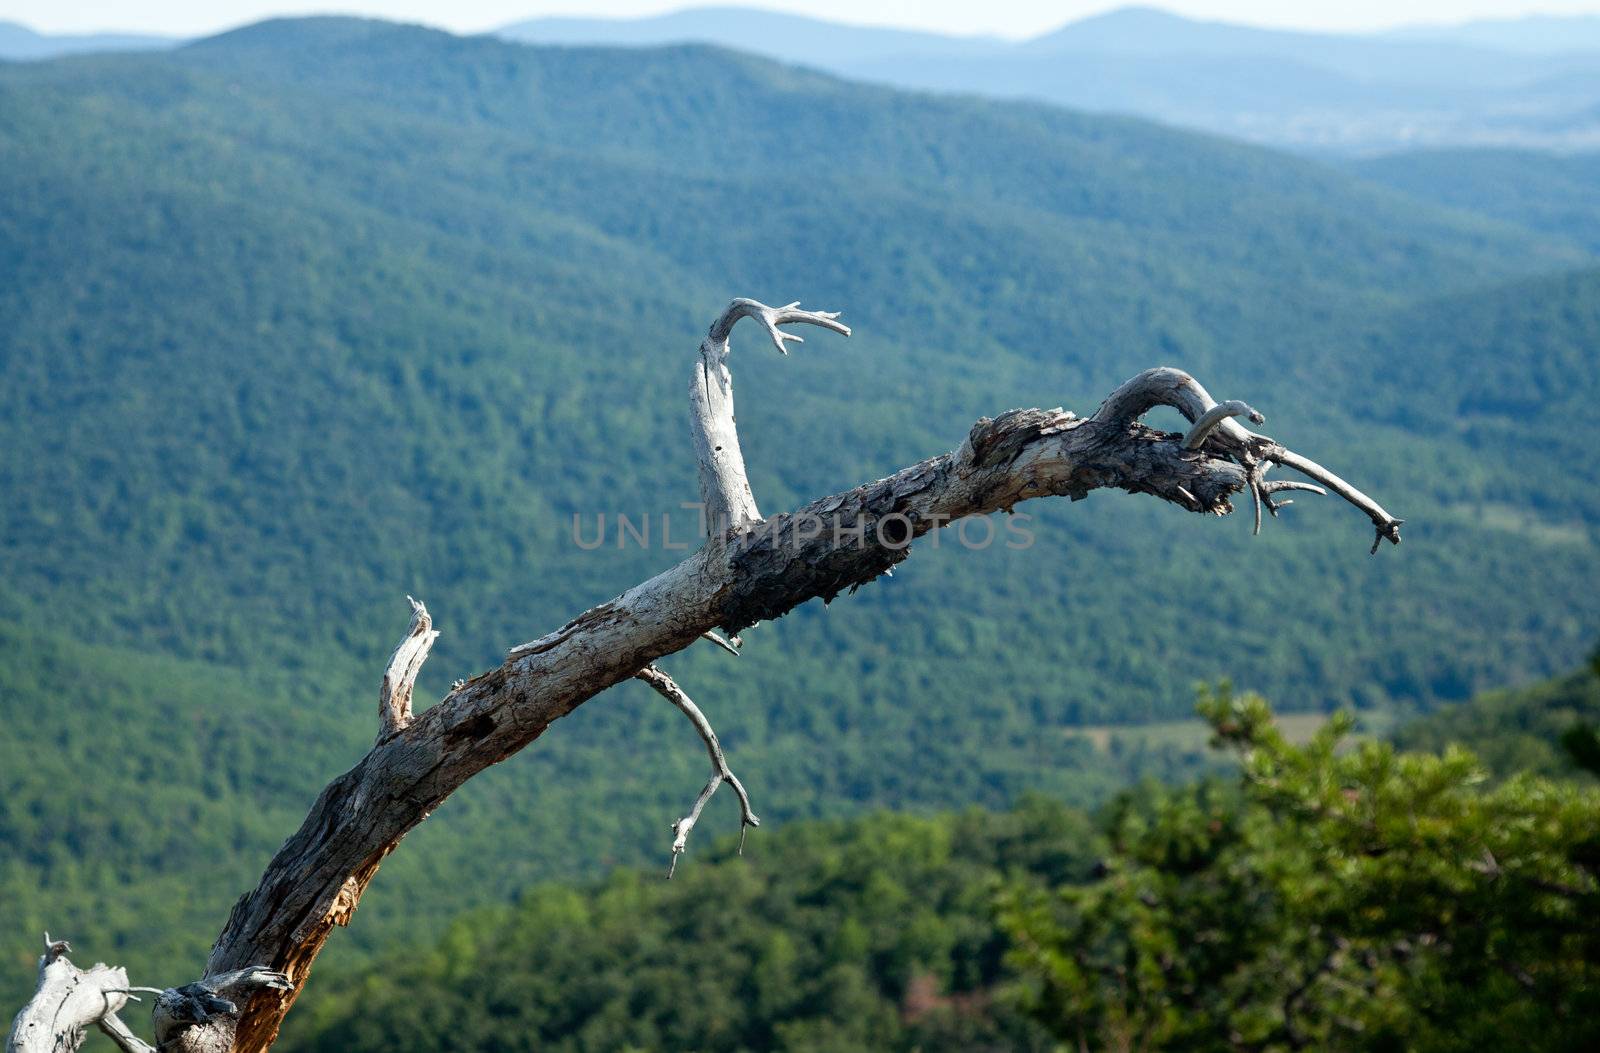 old branch frames a valley in the Shenandoah on a climb of Old Rag